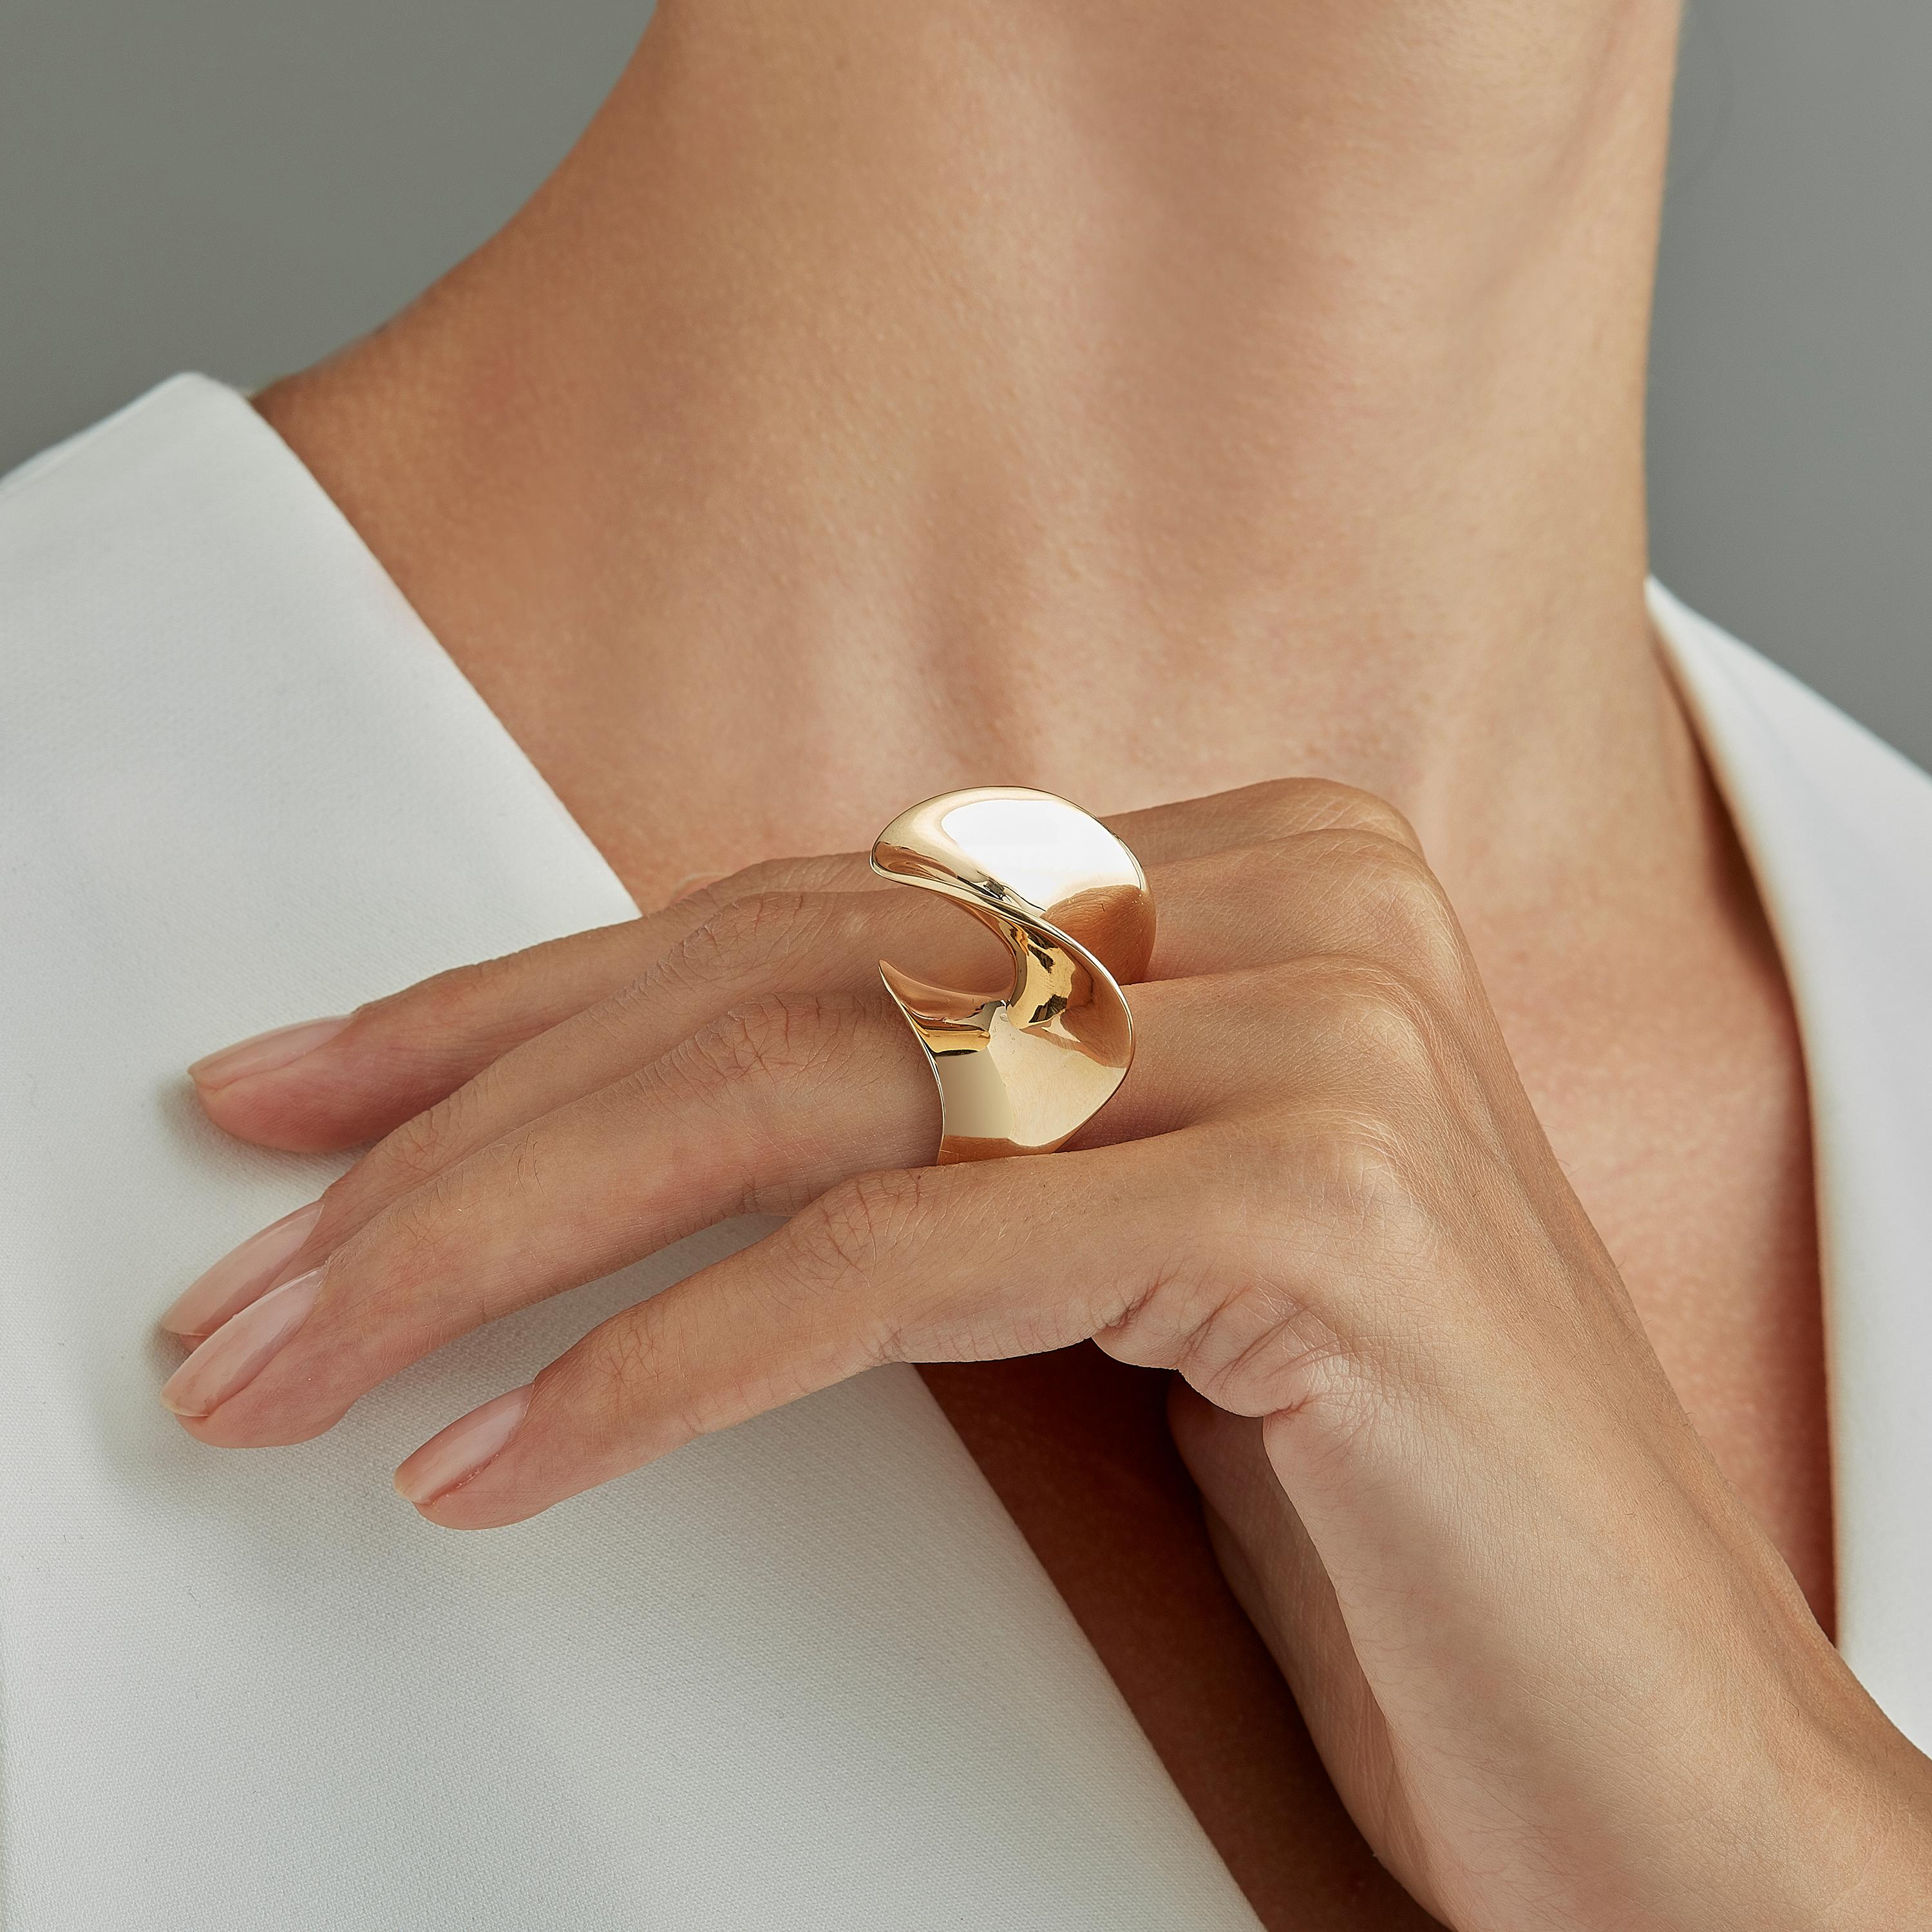 Cocktail ring in 18 karat rosé gold from Rivages, a small series of five limited edition rings, drawing on memories of past travels to conjure up the sea. On the shores of beaches familiar and exotic, near and far, from the Balearics and Seychelles